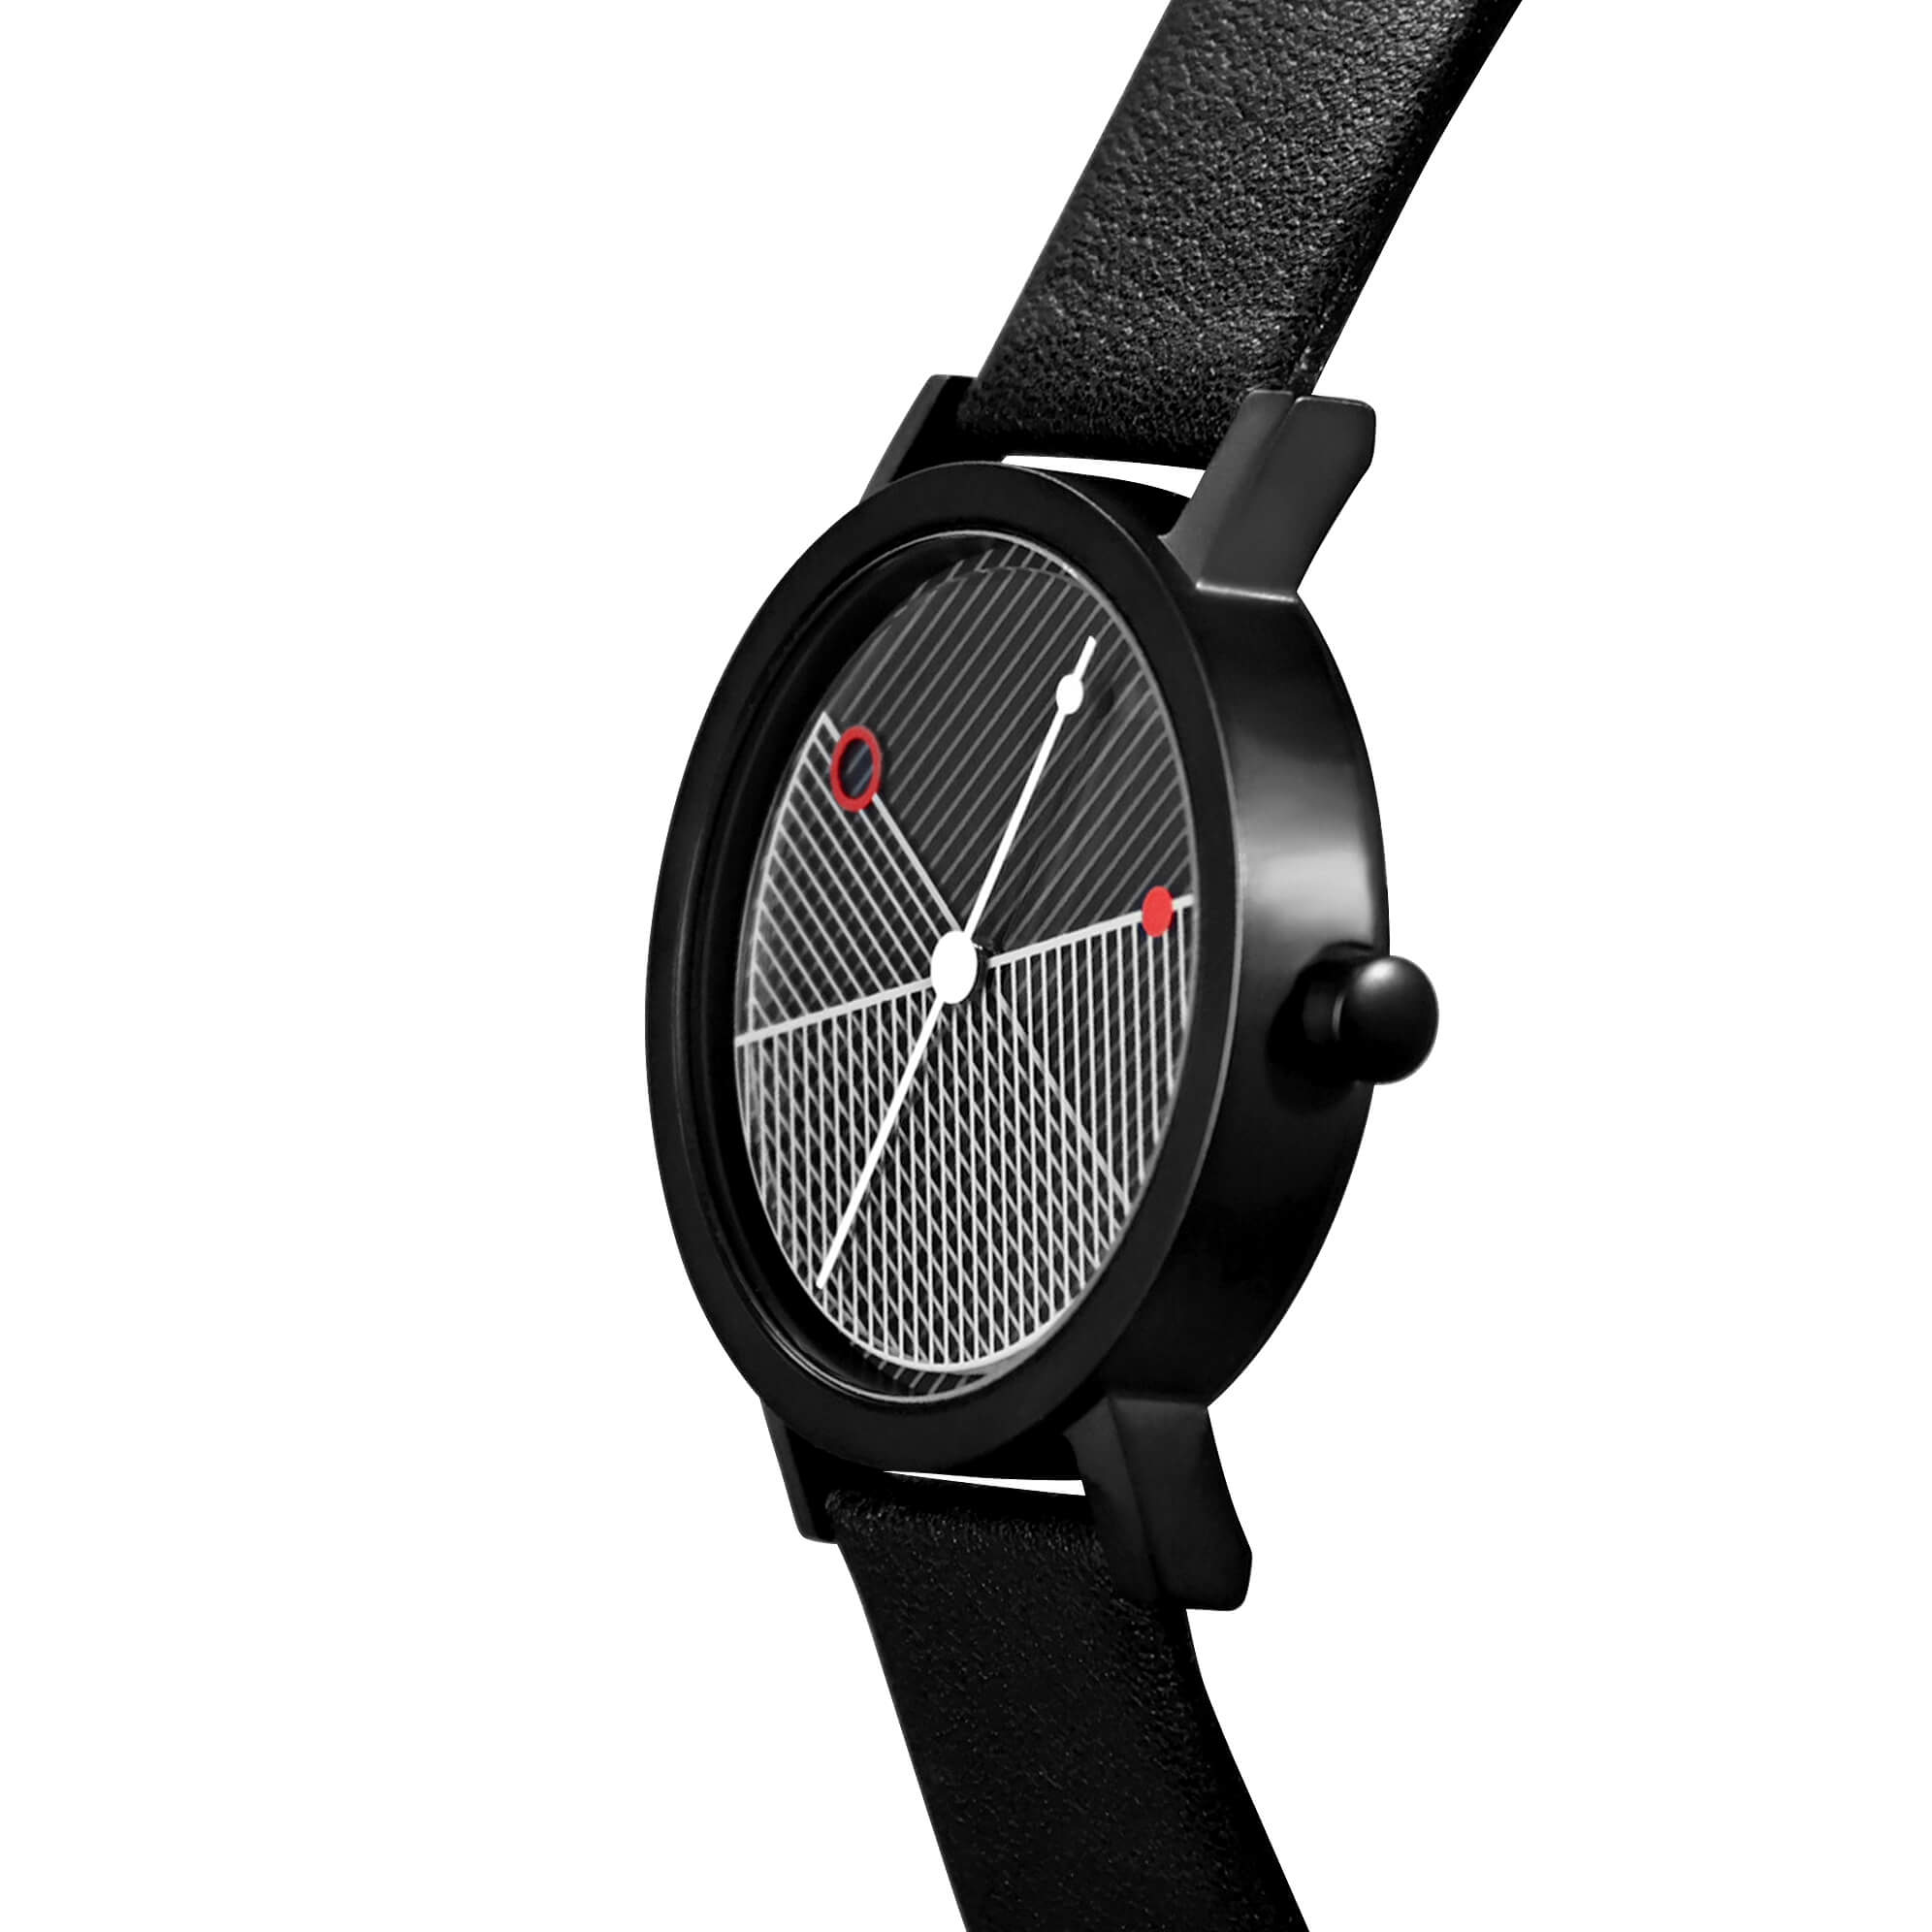 Hatch Black - Projects Watches